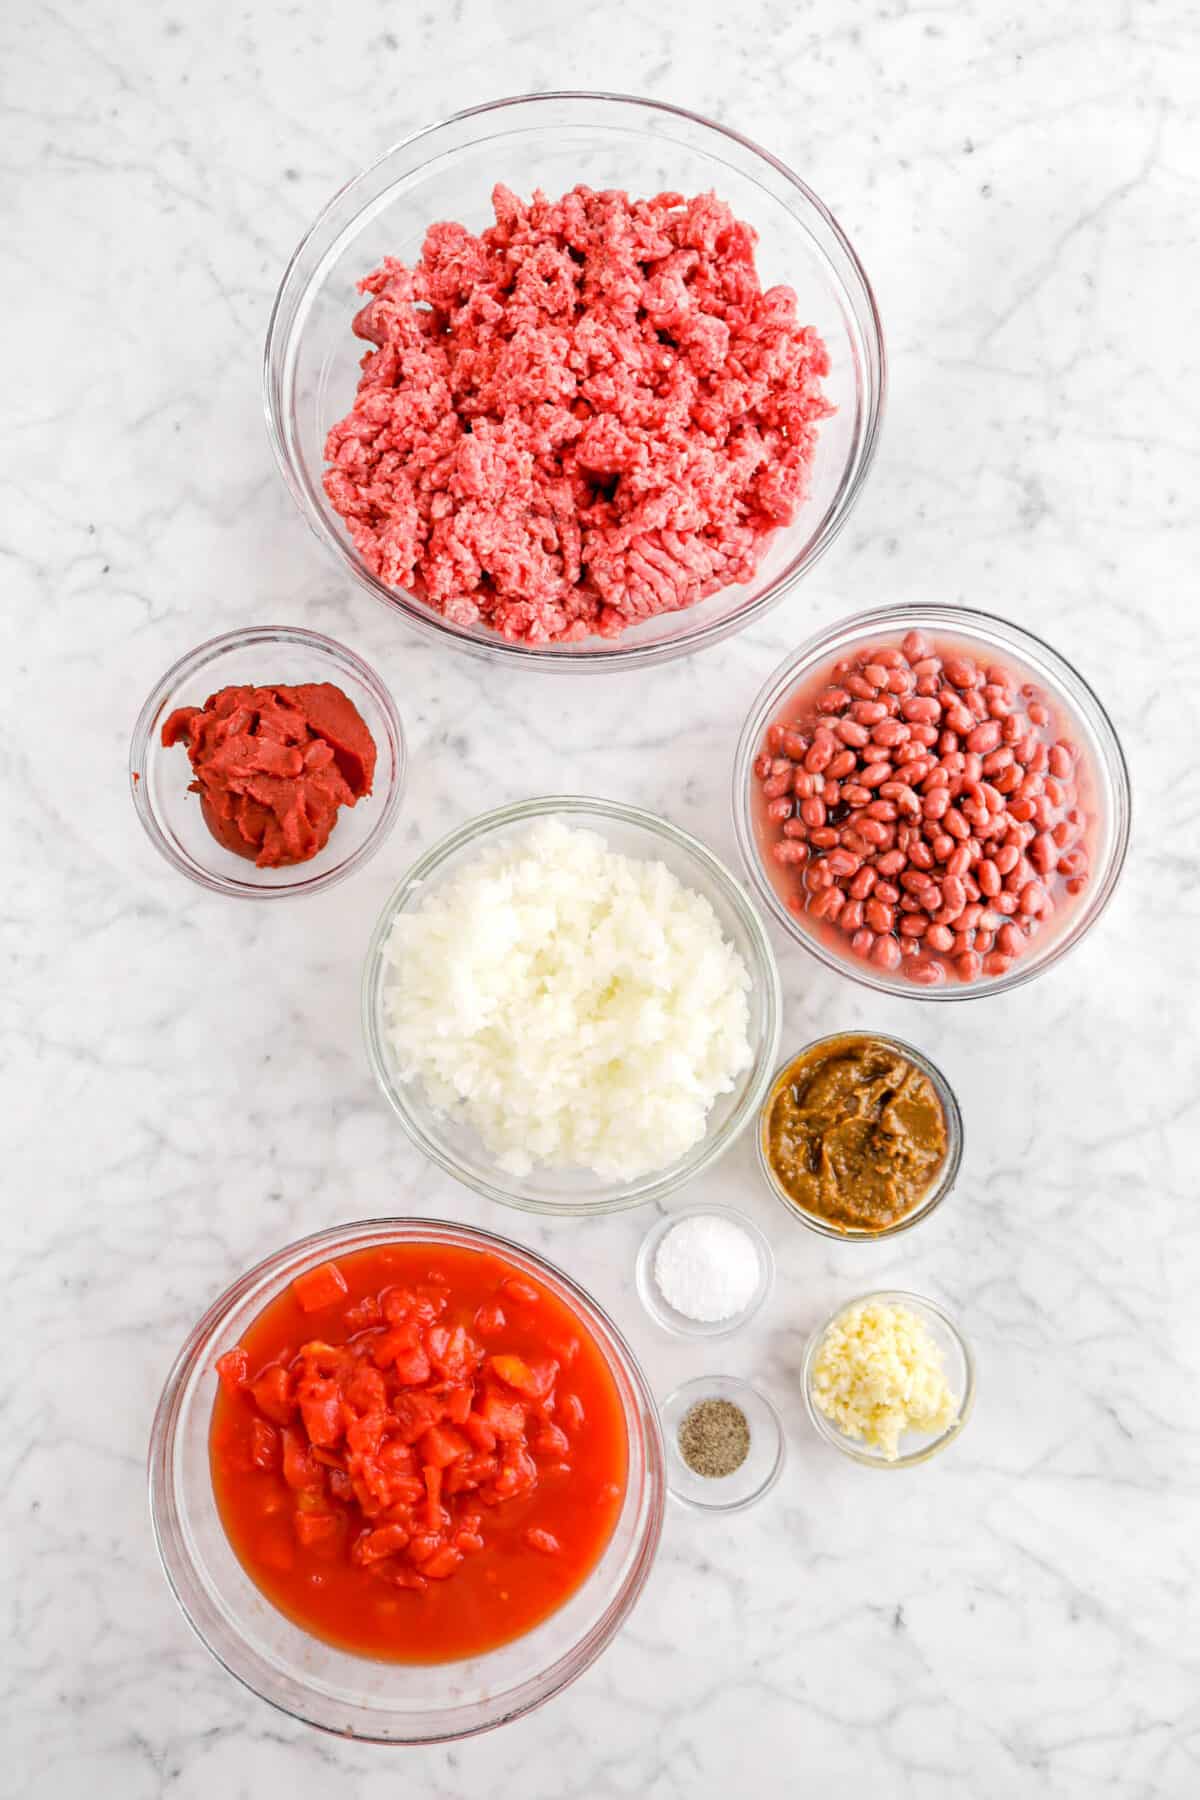 ground beef, red beans, tomato paste, chopped yellow onion, chili paste, salt, pepper, garlic, and tomatoes on marble counter